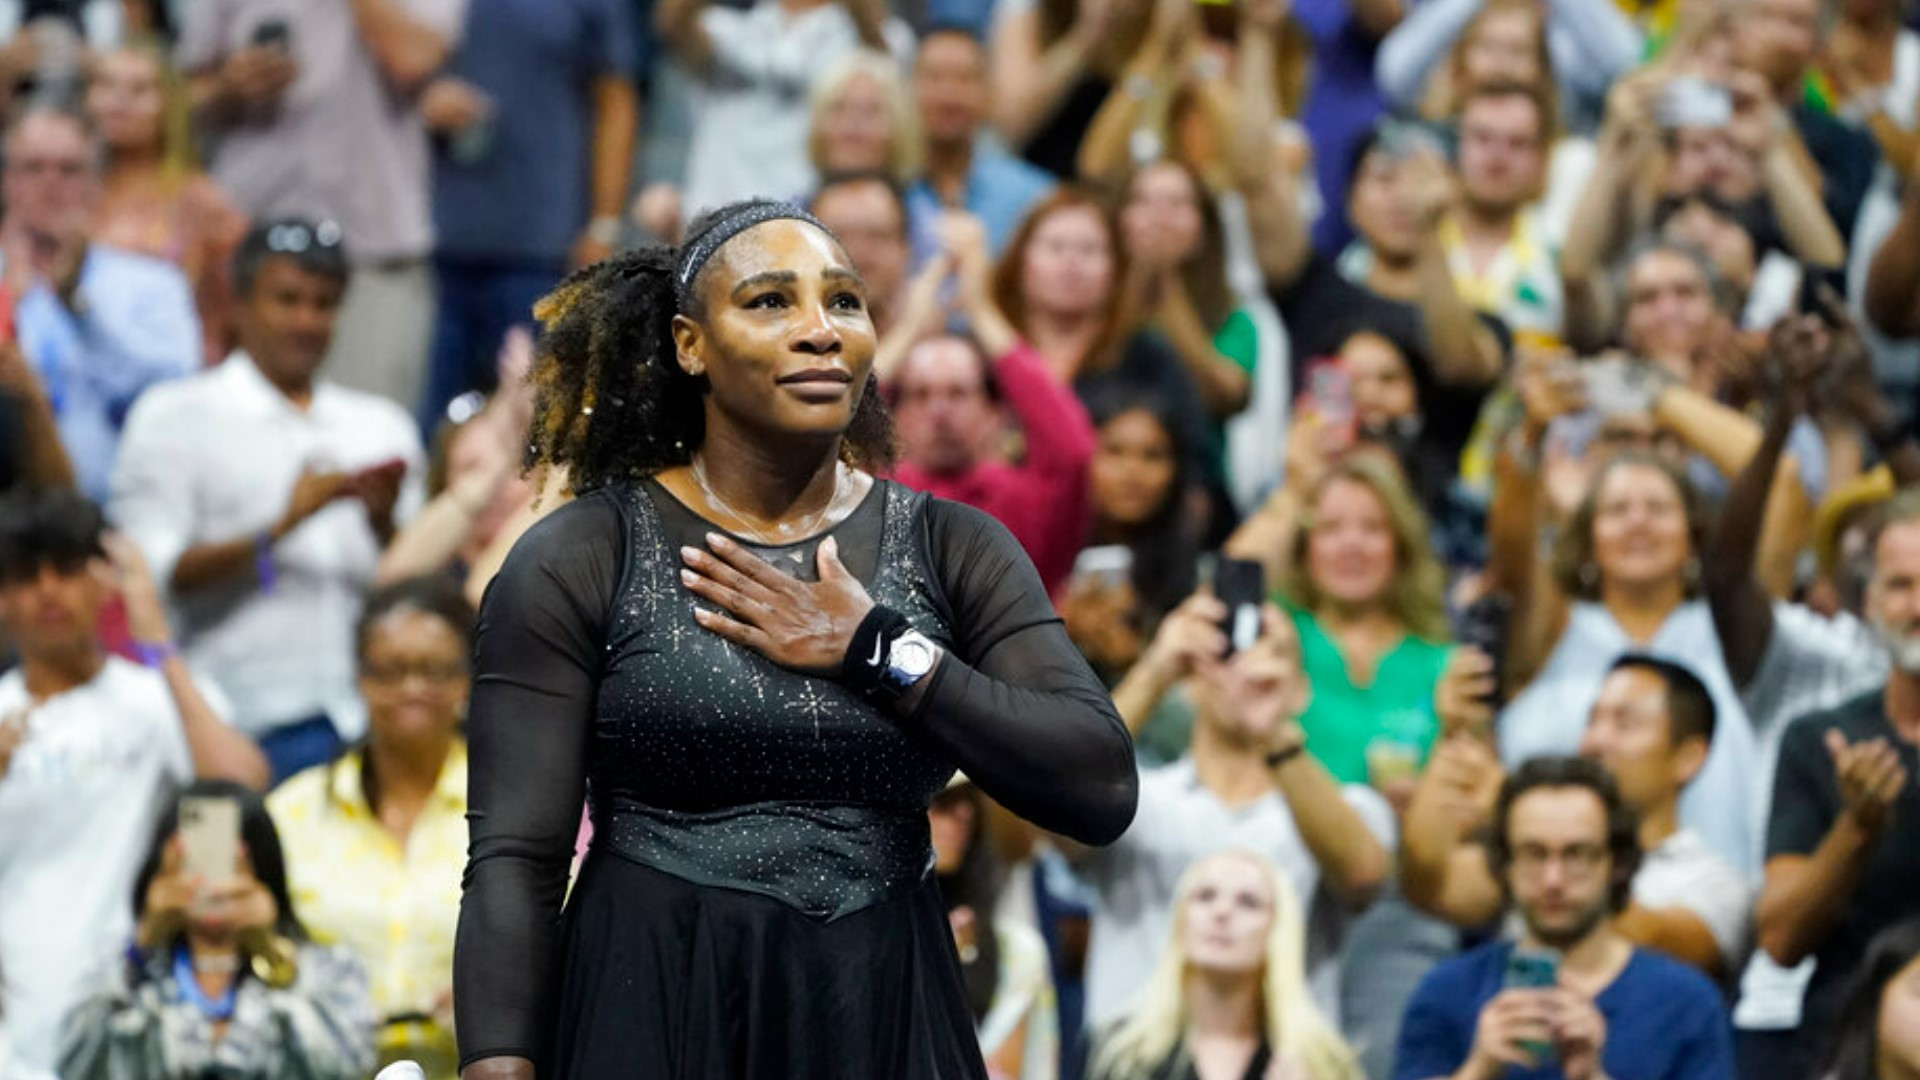 The GOAT received a standing ovation with thunderous applause from the crowd after the final set.